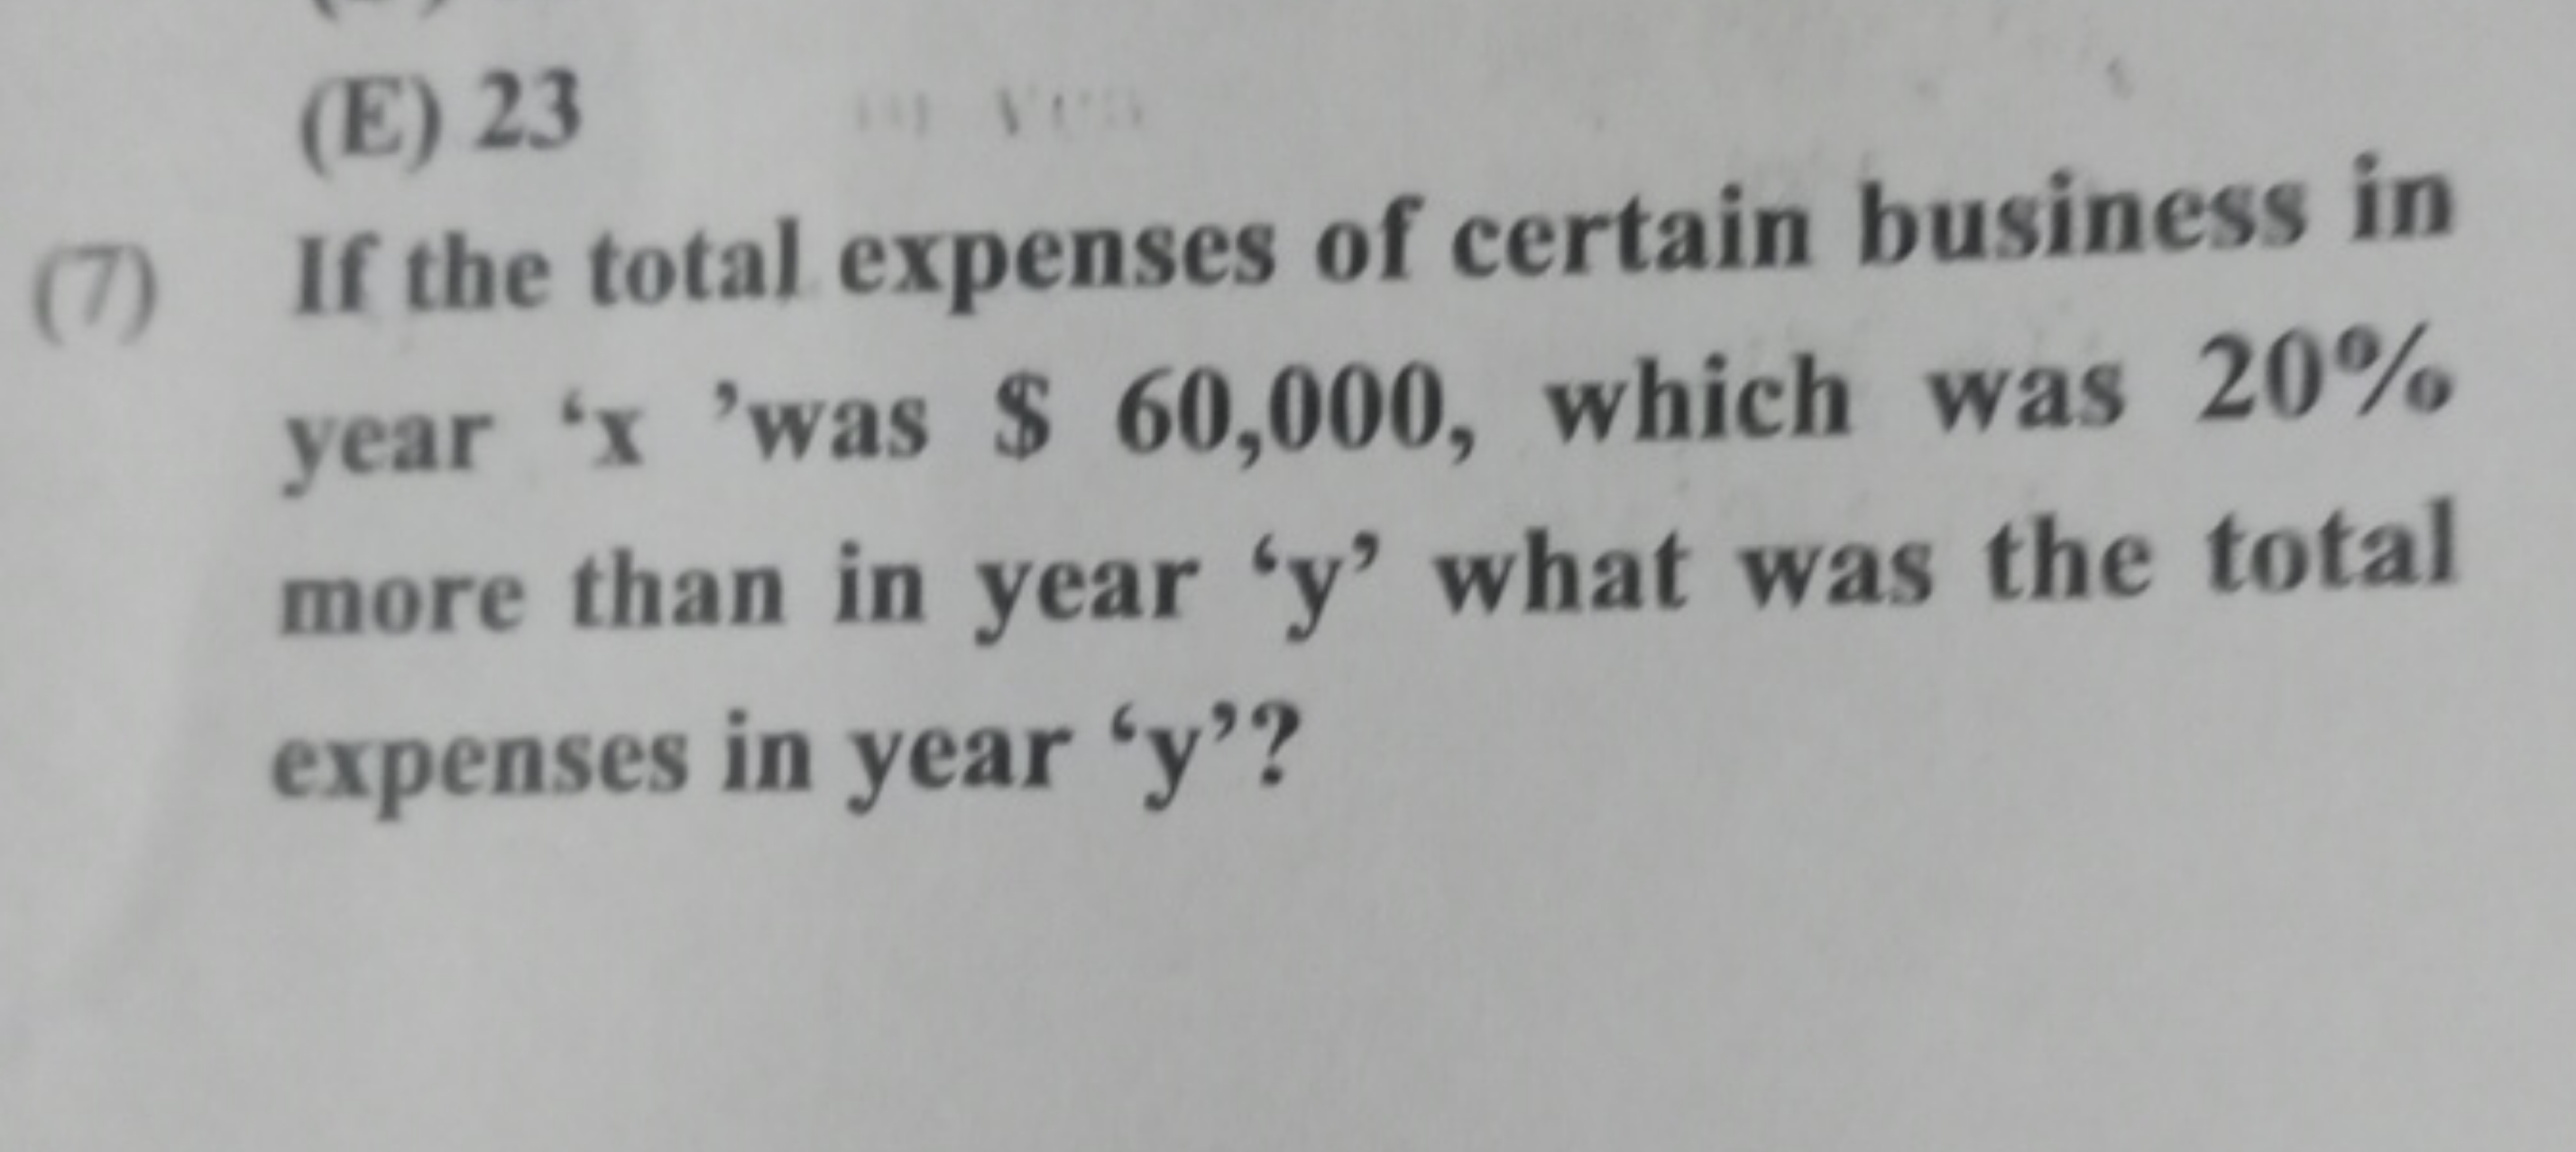 (E) 23
(7) If the total expenses of certain business in year ' x 'was 